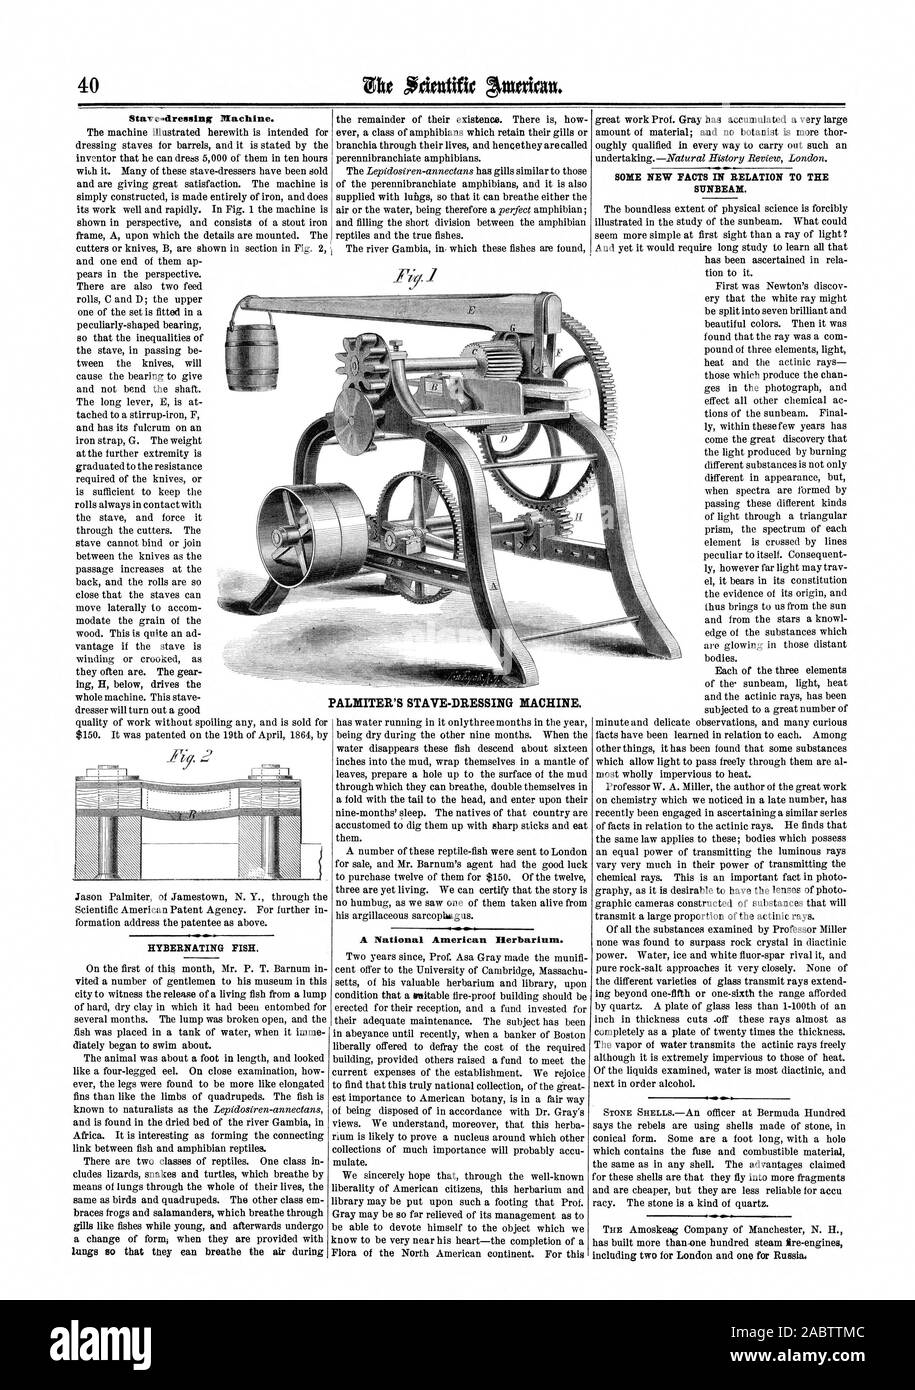 Stave.drensing Machine. HYBERNATING FISH. A National American Herbarium. SOME NEW FACTS IN RELATION TO THE SUNBEAM. PALMITER'S STAVE-DRESSING MACHINE., scientific american, 64-07-16 Stock Photo